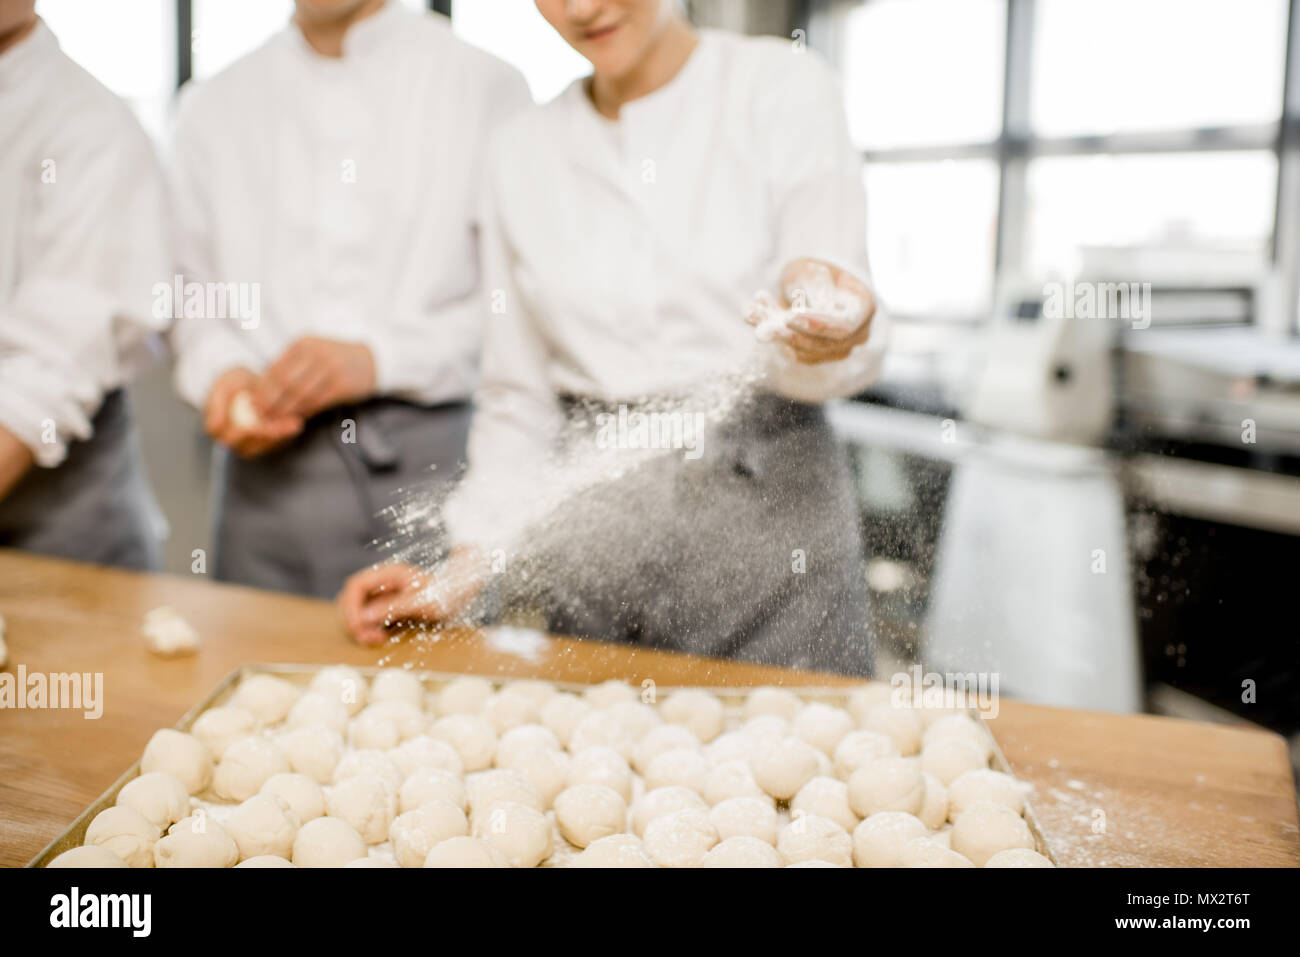 Bakers making buns at the manufacturing Stock Photo